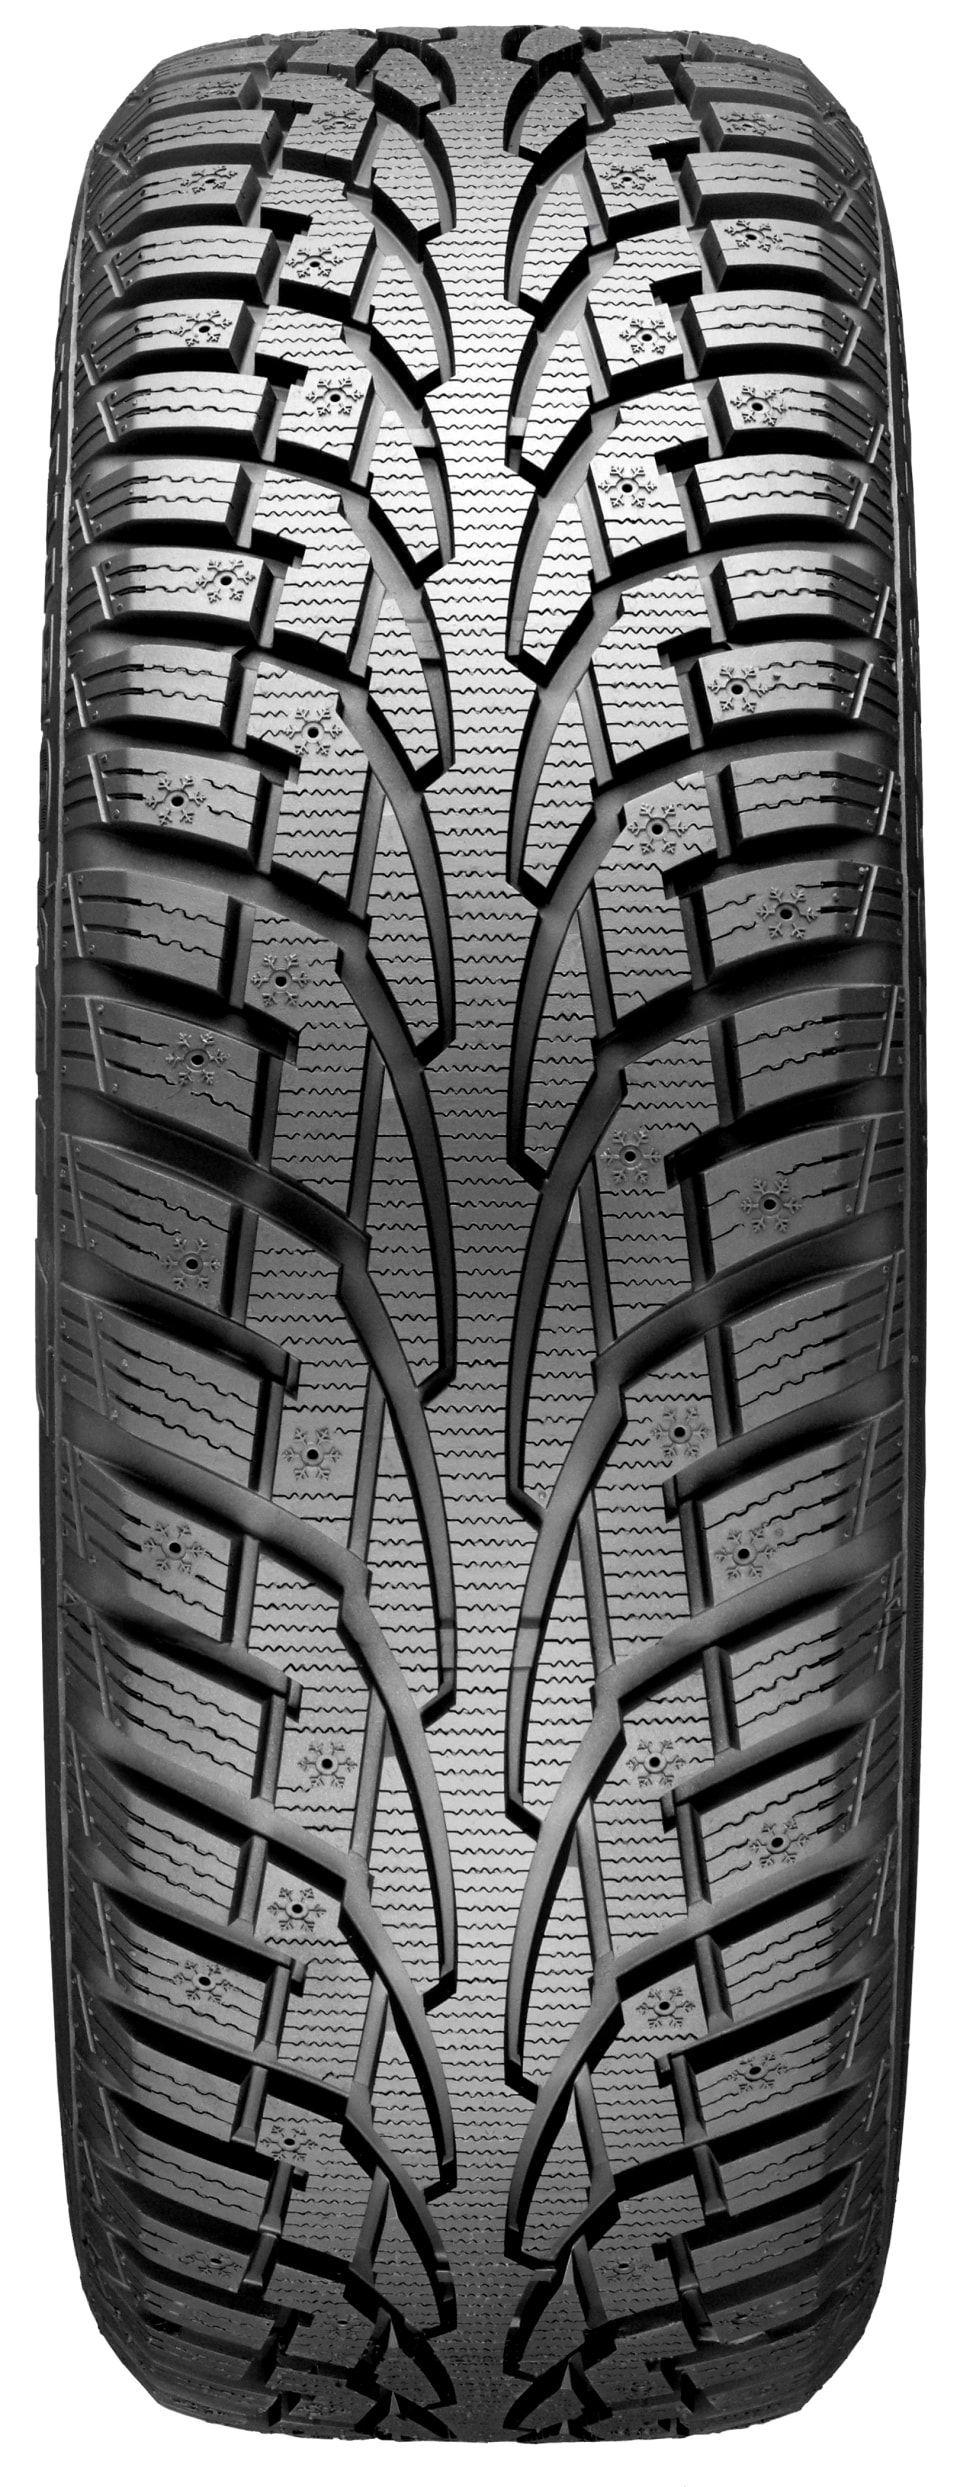 Active Green + Ross - - Tiger 3 Paw Ice Snow & 79T Uniroyal P155/80R13 